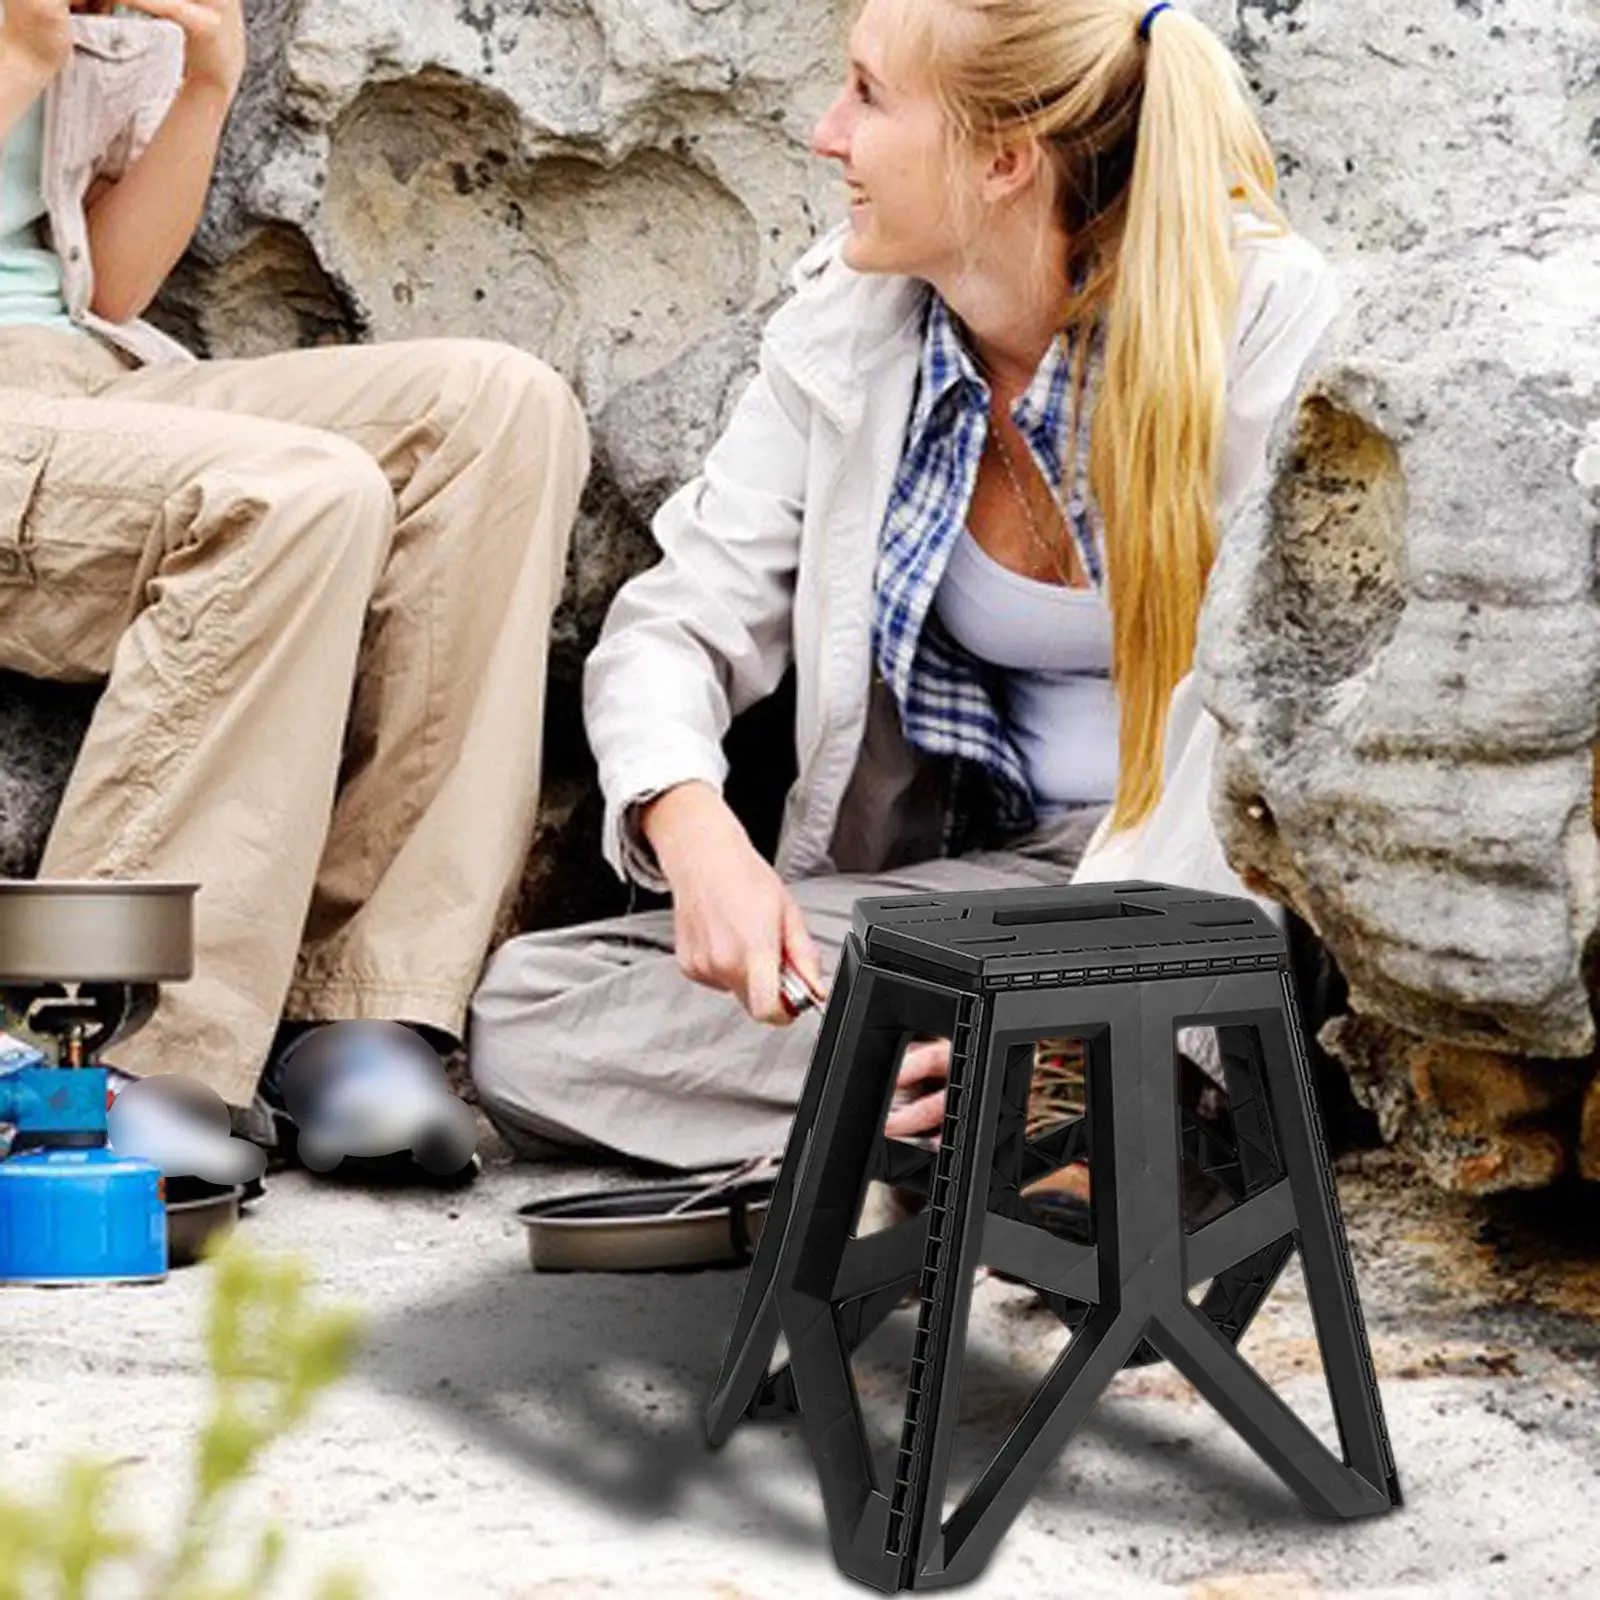 Collapsible Foldable Stool Camping Chair Plastic Garden Seat Picnic Outdoor